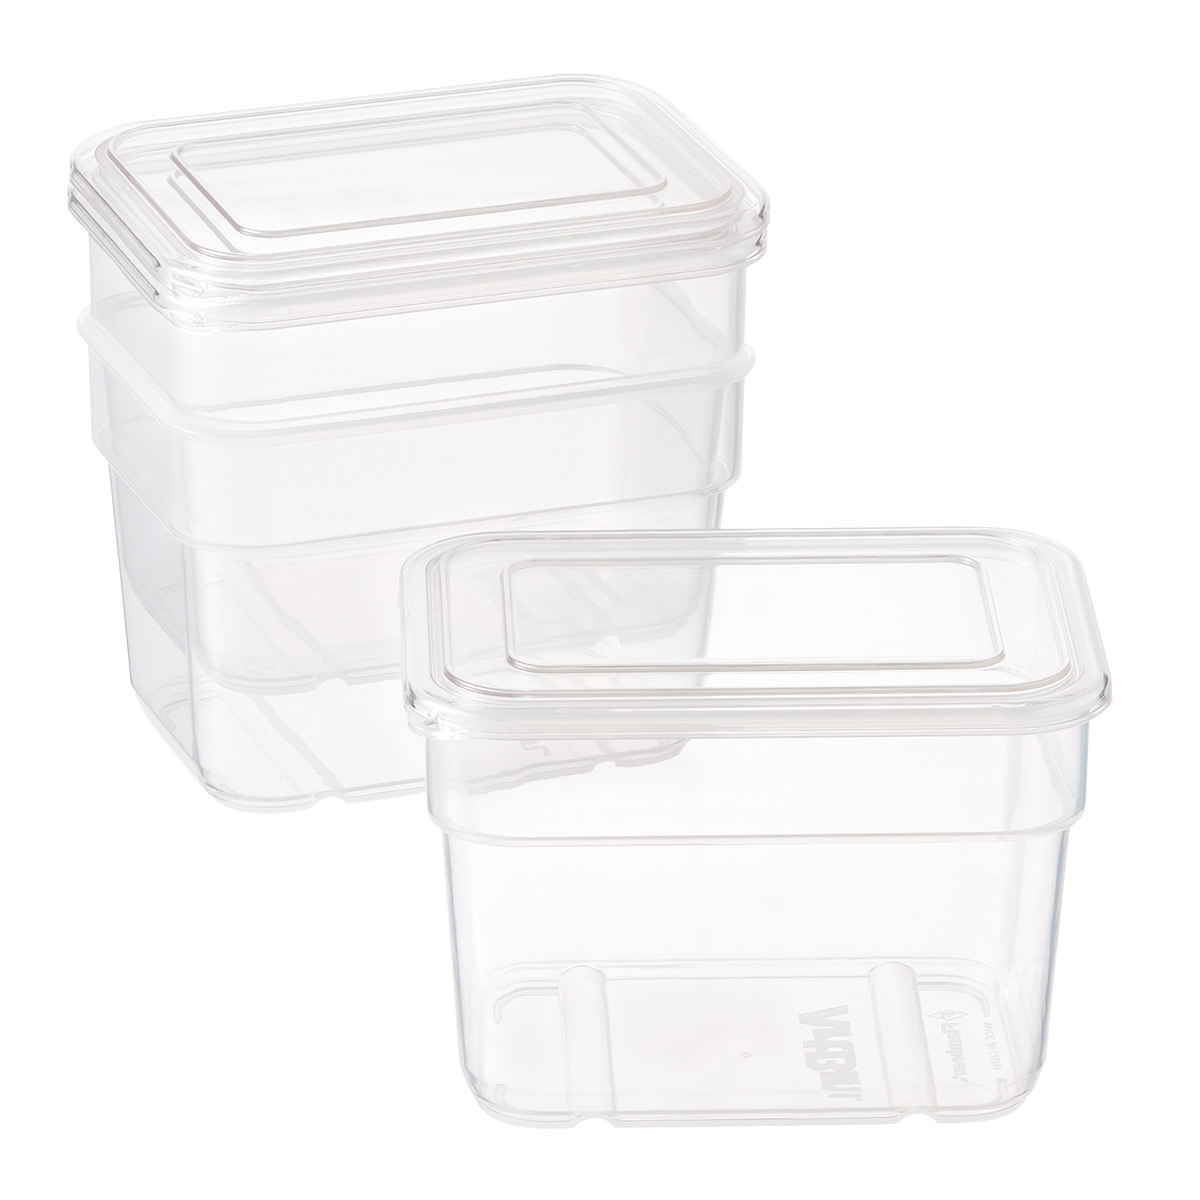 https://www.containerstore.com/catalogimages/387606/10080778-Artbin-storage-bins-clear-s.jpg